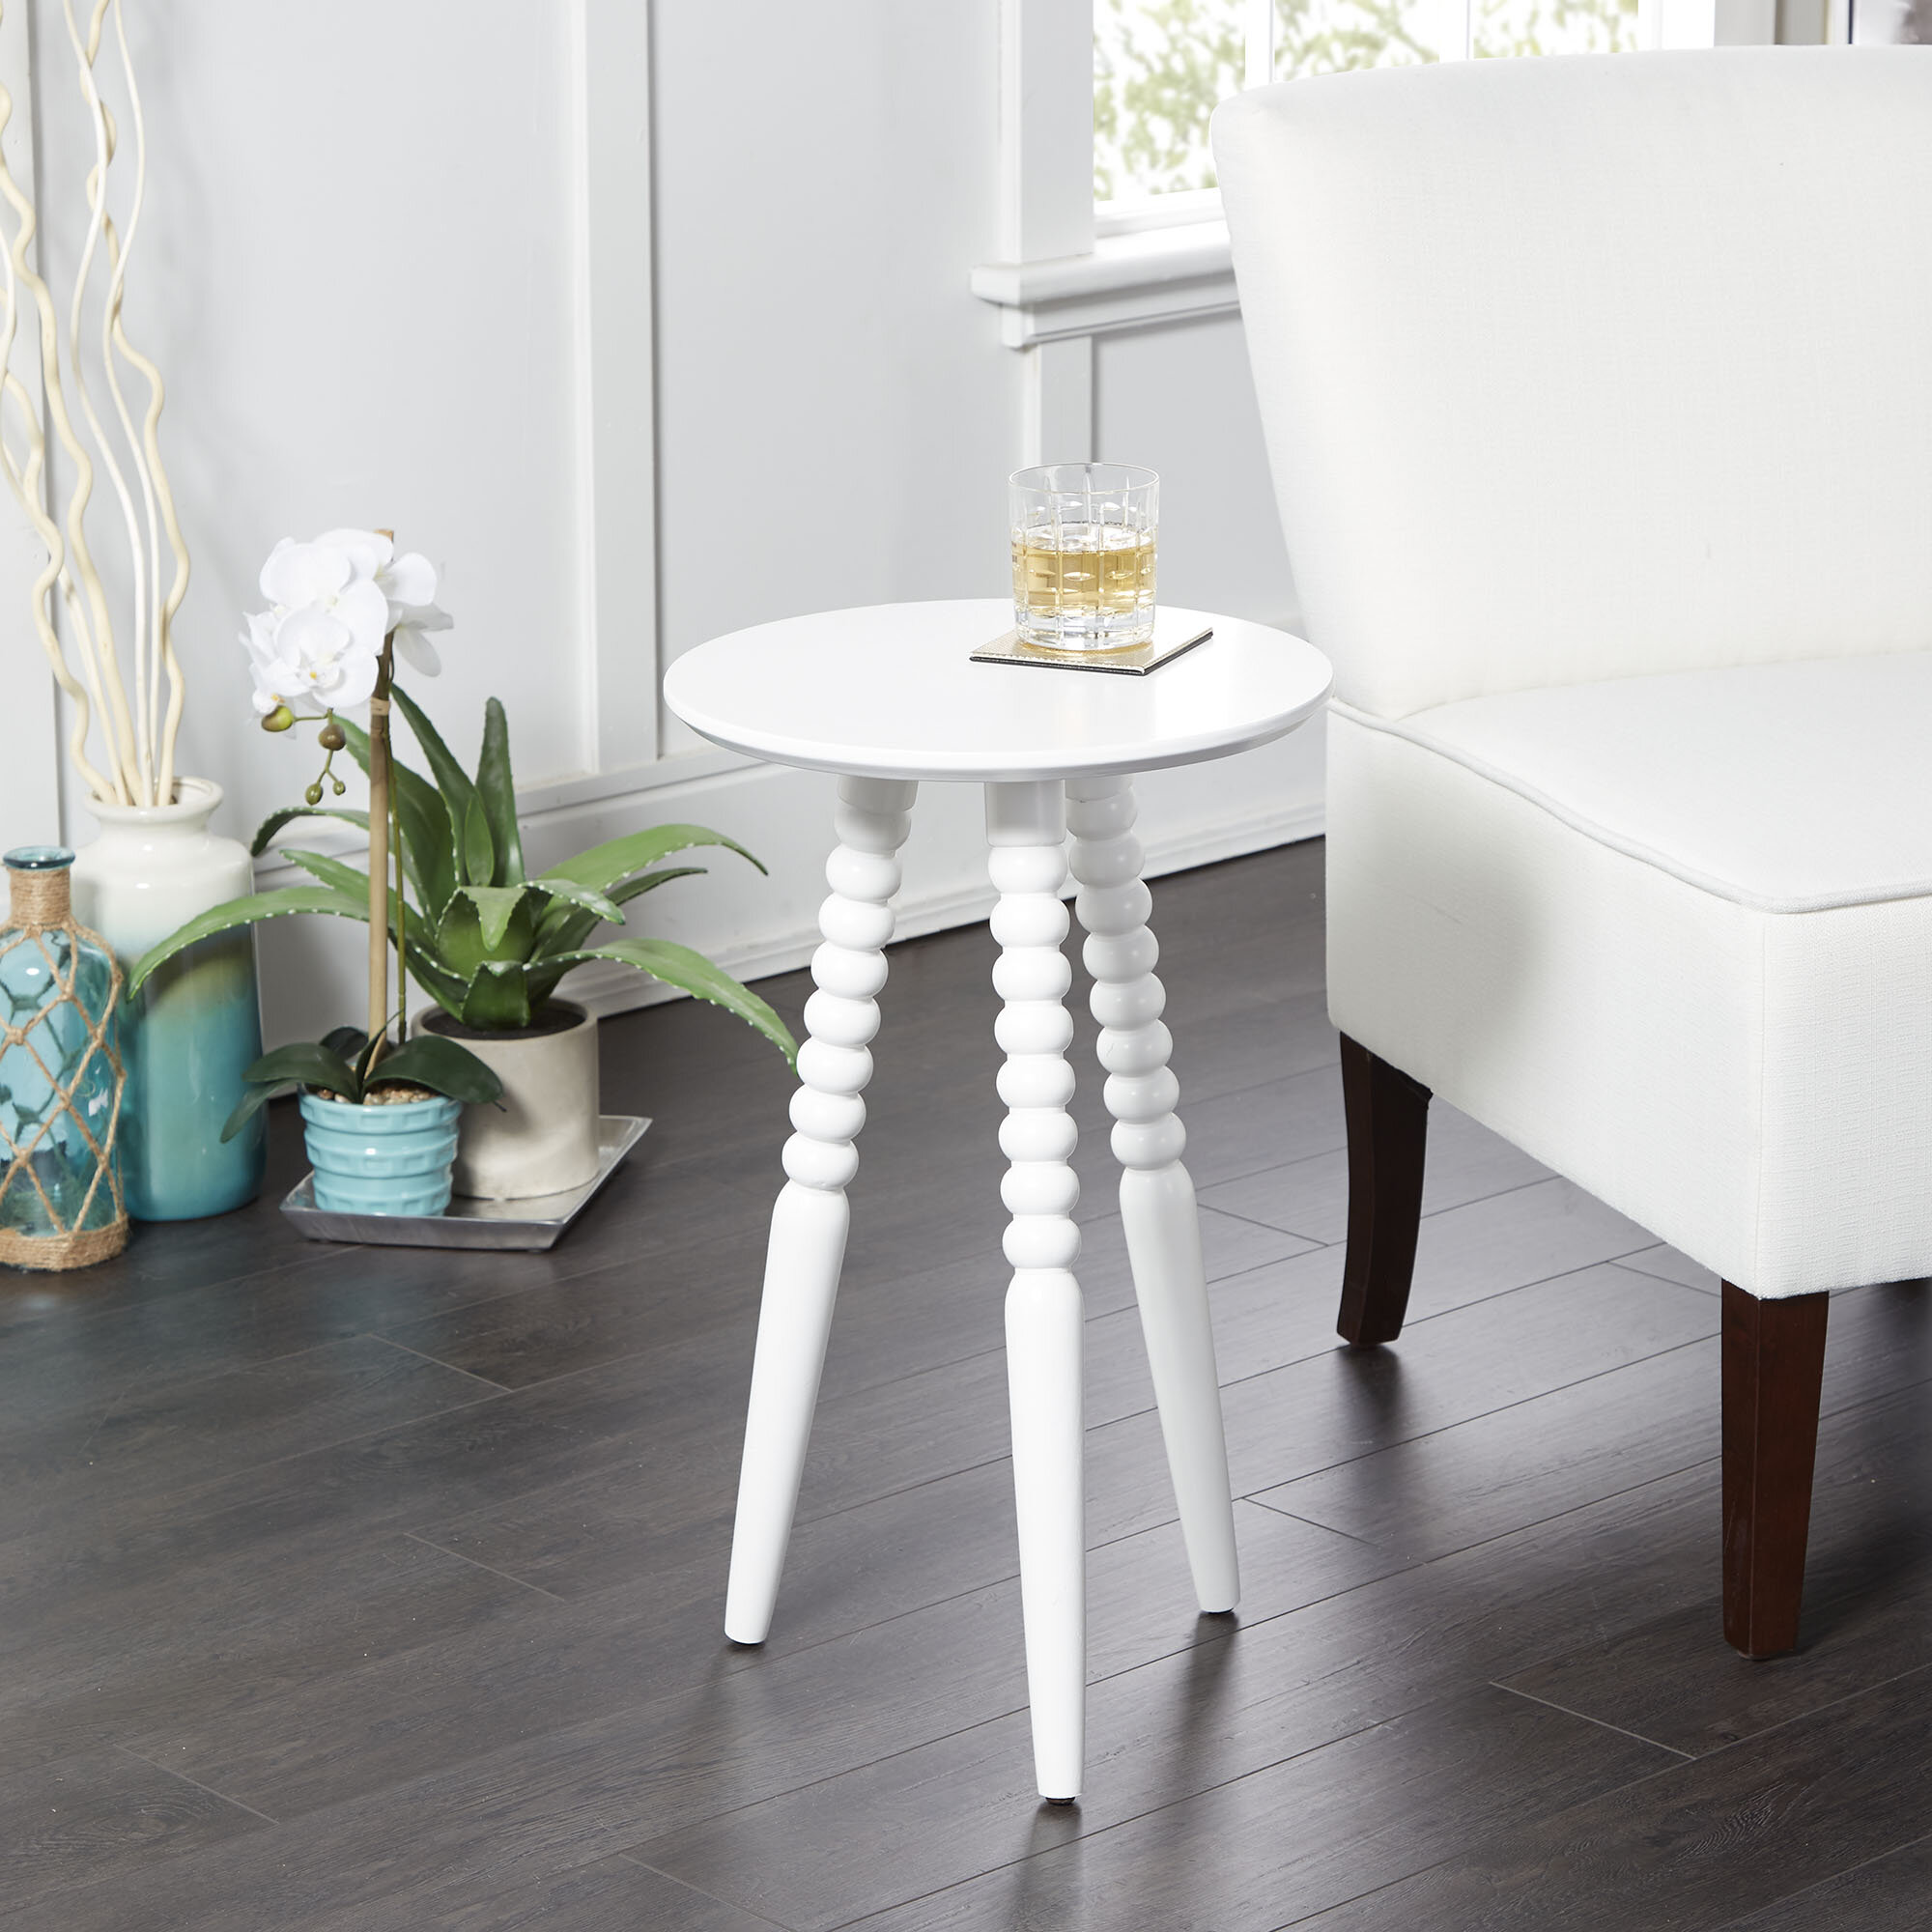 Small White Round End Table : Buy Ovicar Metal Tray End Table Round